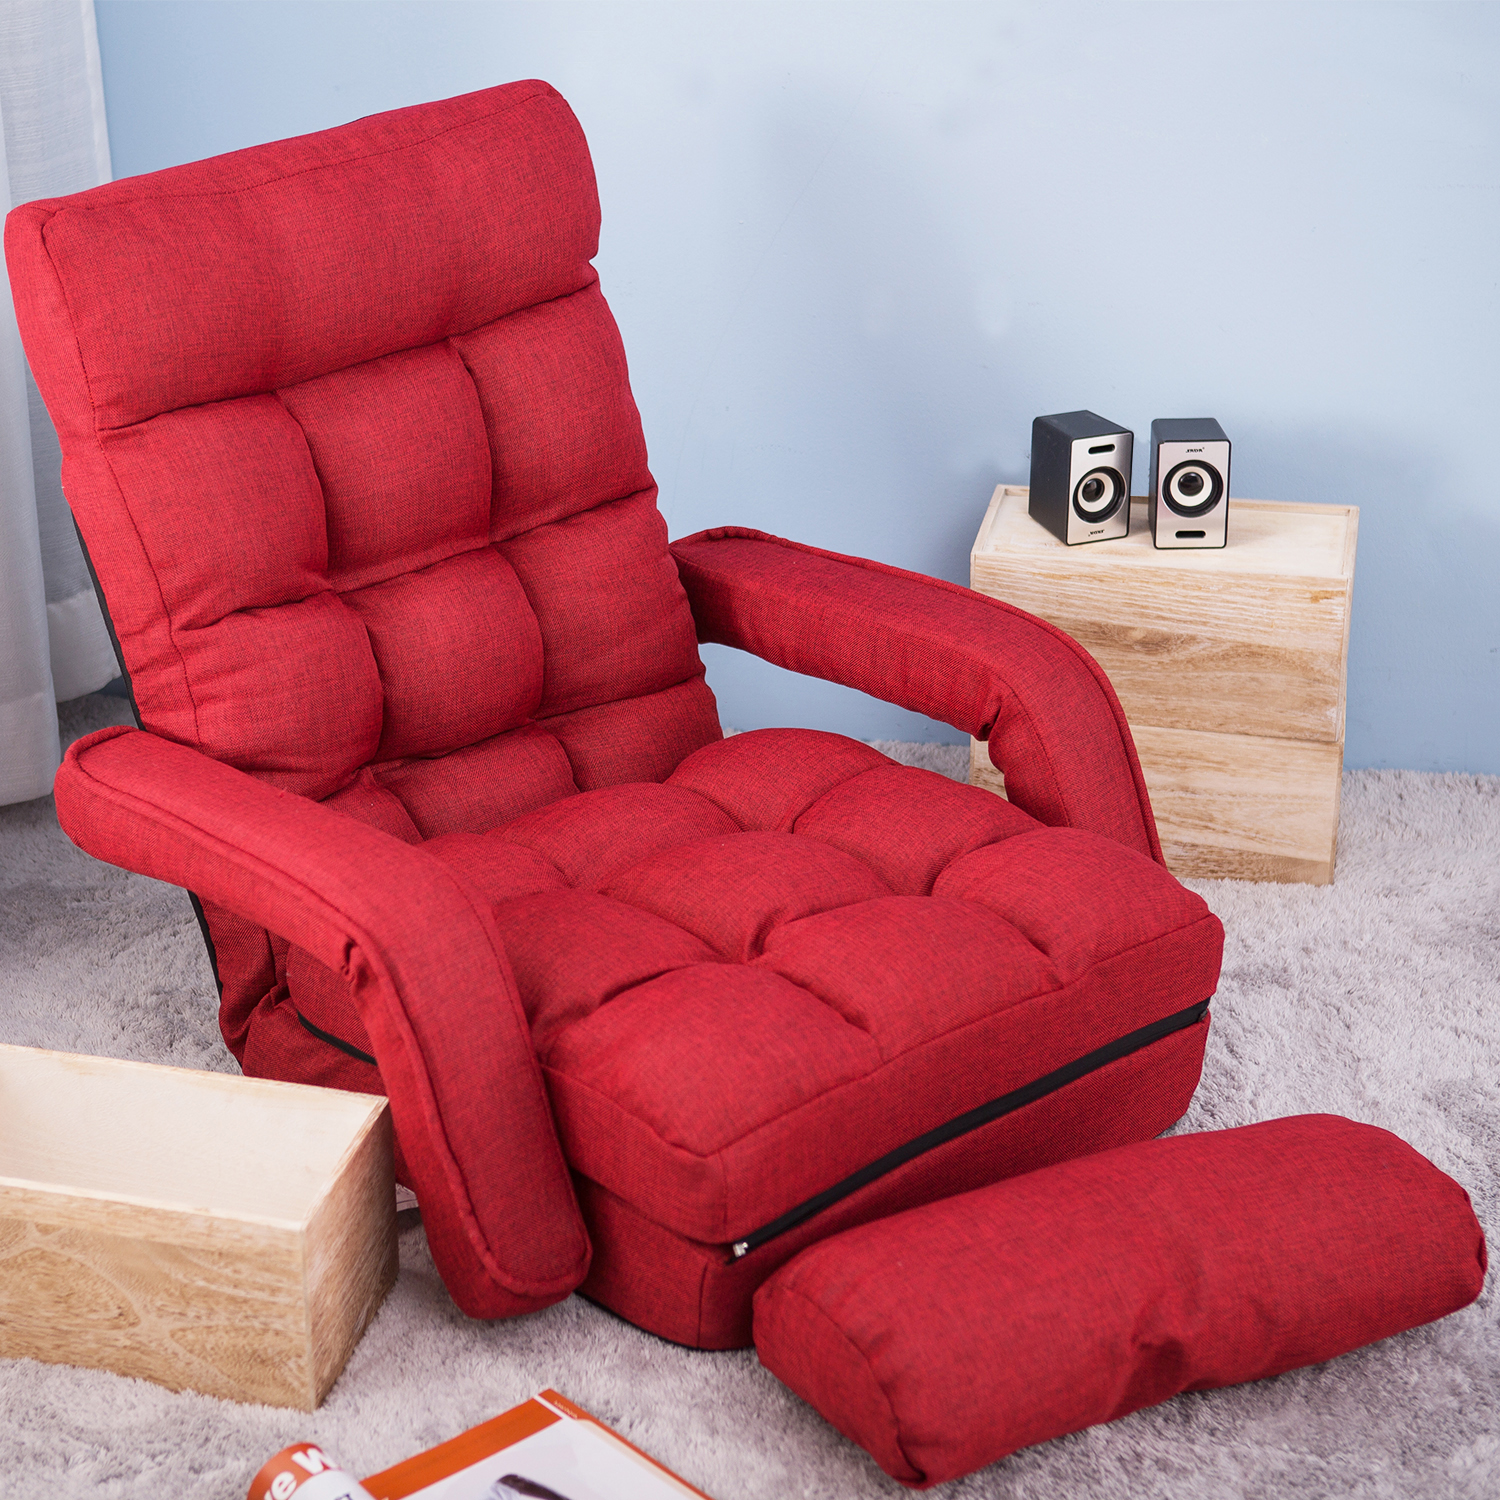 Floor Chair Set with Adjustable Backrest, Folding Chair with Armrests and a Pillow, Lazy Sofa Floor Chair Sofa Lounger Couch for Living Room Bedroom Dorm Office, No Assembly Required, Red, Q6294 - image 3 of 10